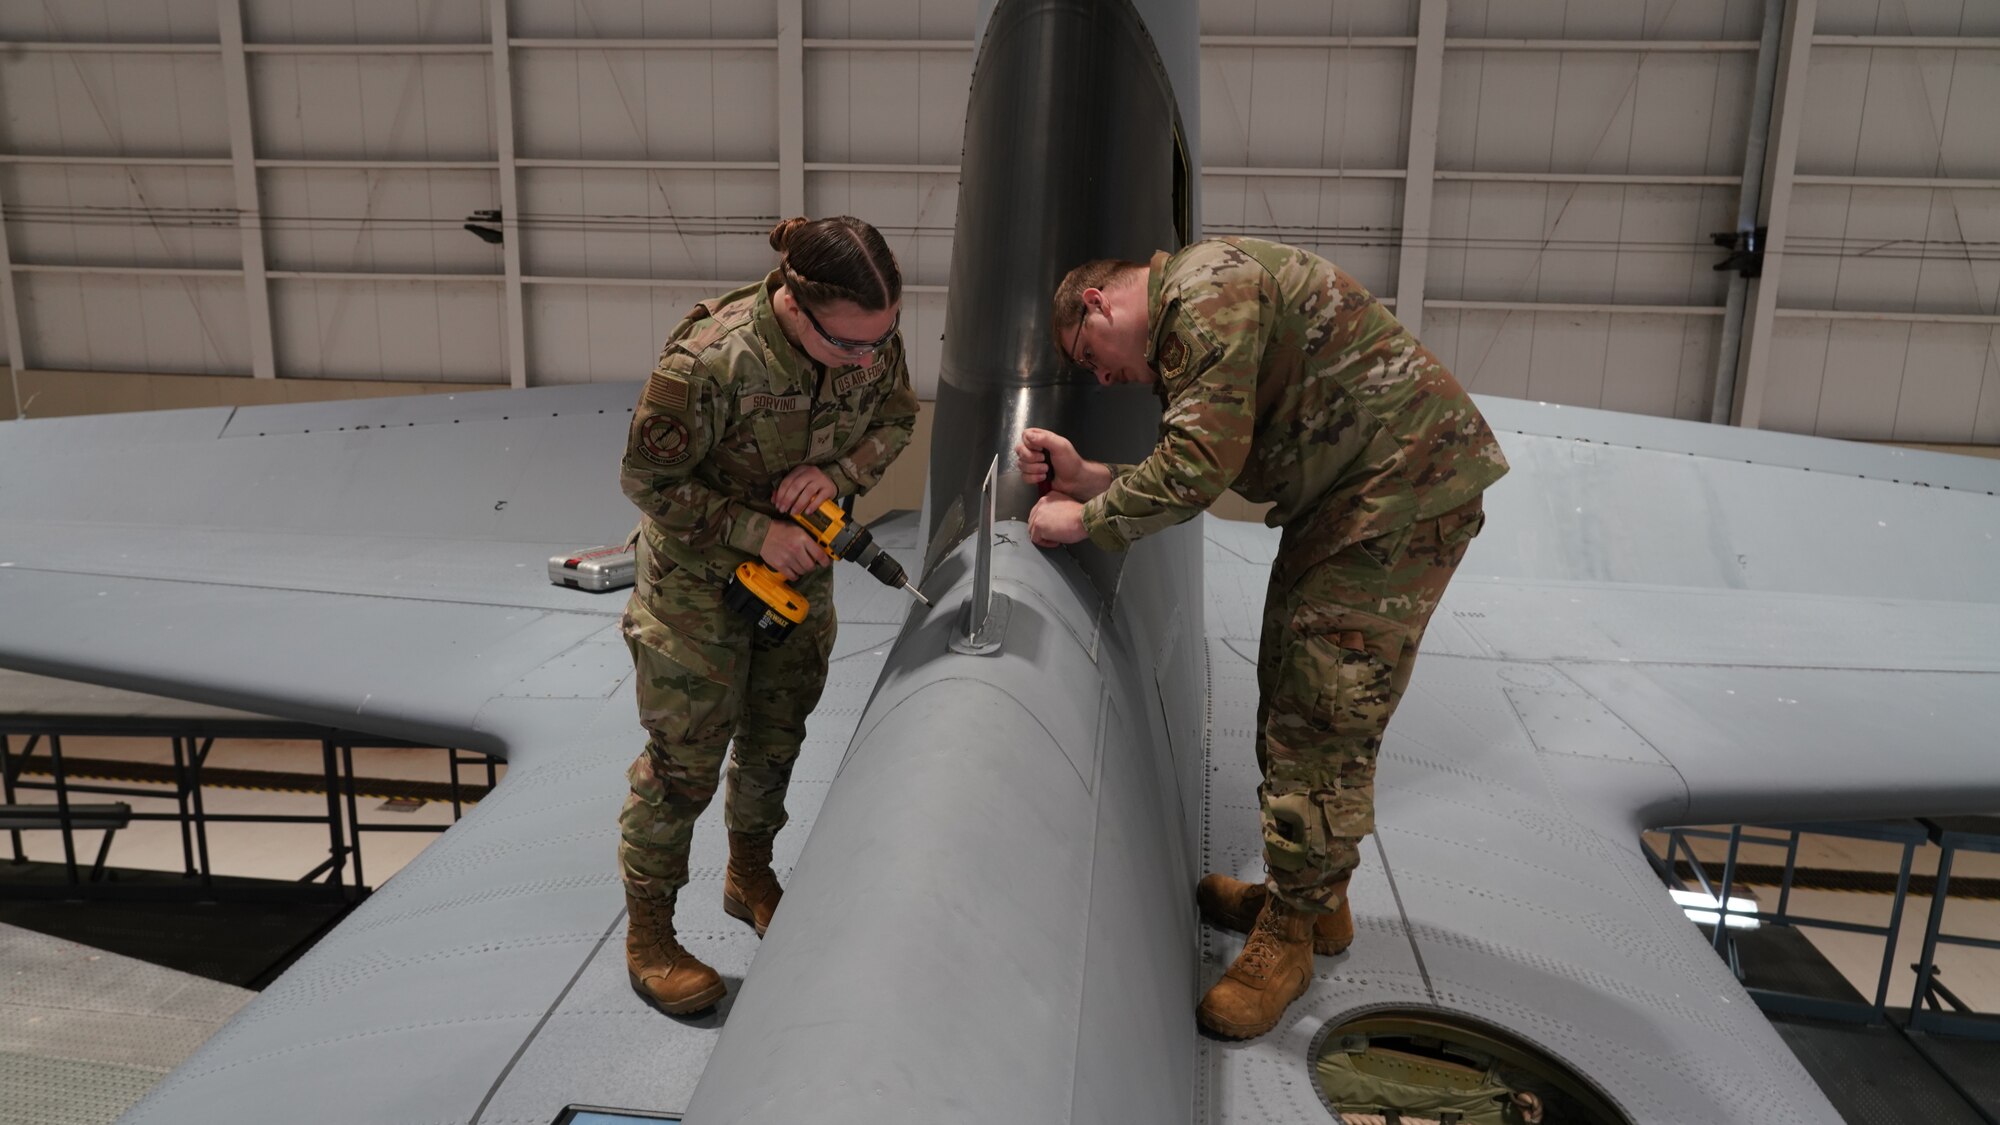 Female Airman removes screws from panel while male Airman removes sealant from panel.